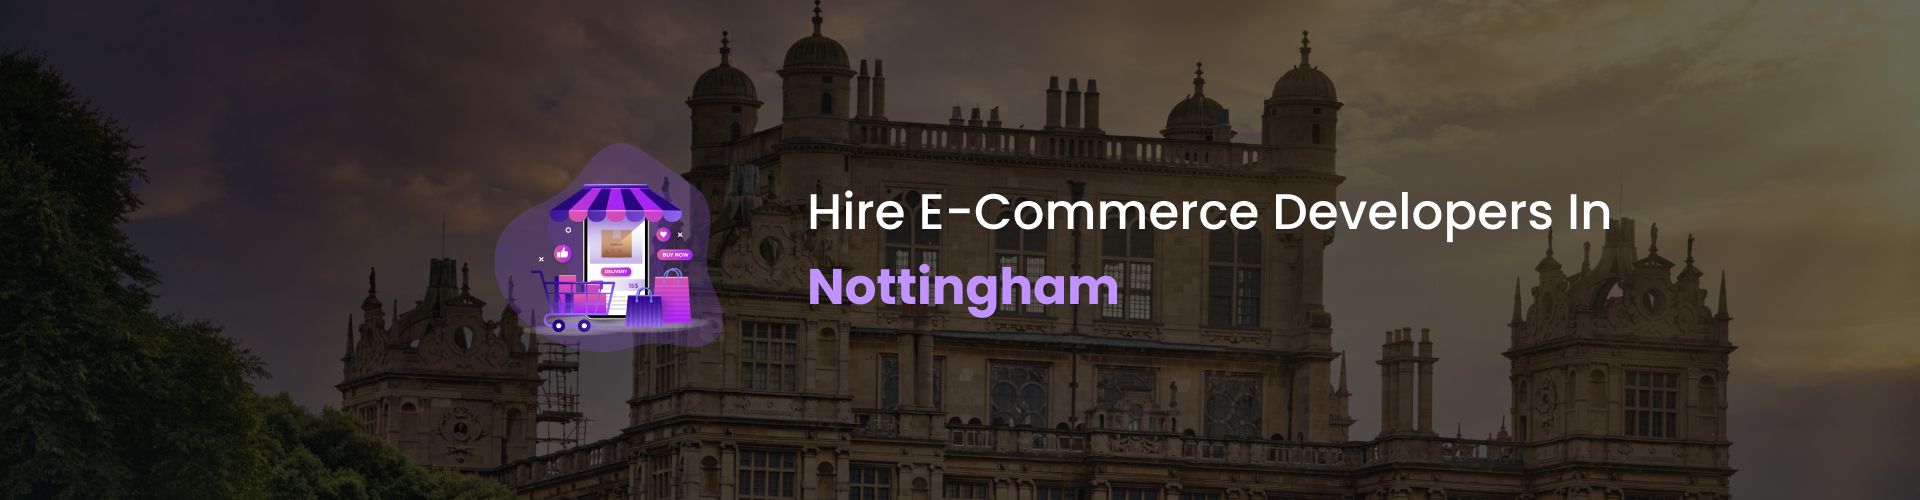 hire ecommerce developers in nottingham